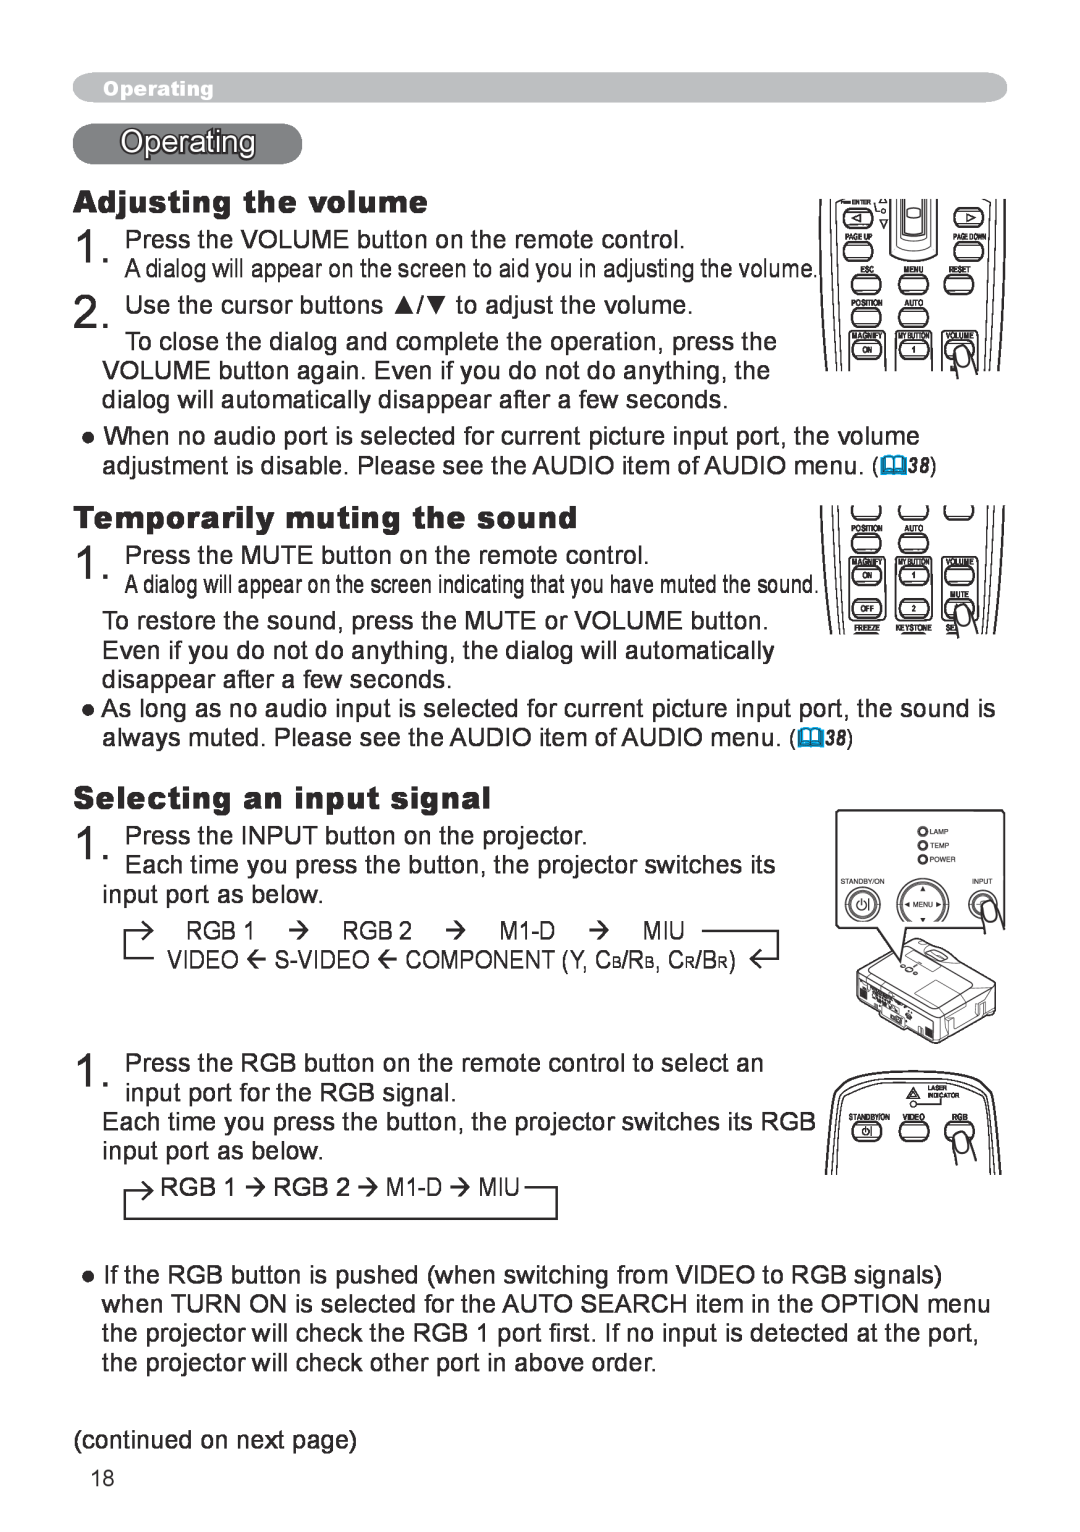 Hitachi CP-X608 user manual Operating, Adjusting the volume, Temporarily muting the sound, Selecting an input signal 